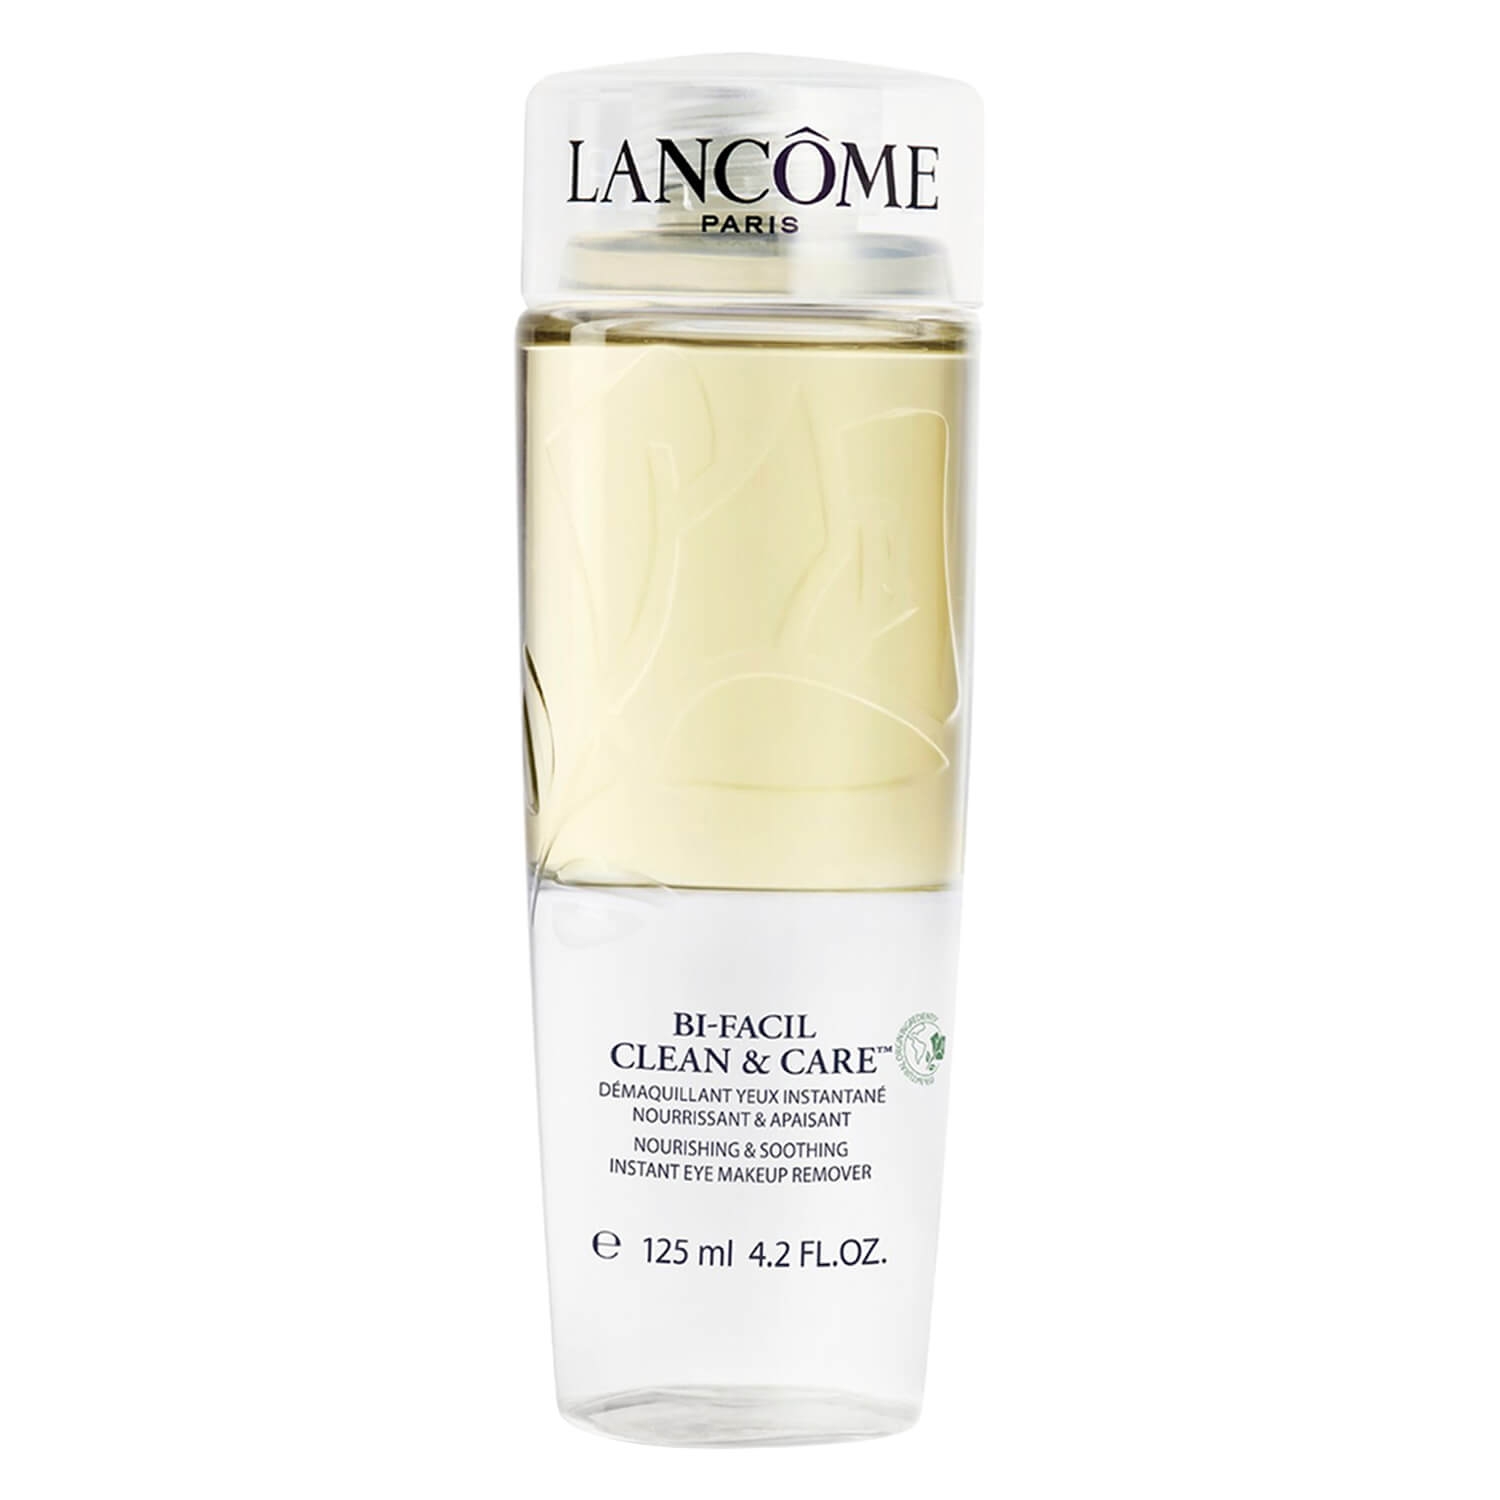 Product image from Lancôme Skin Bi-Facil Clean and Care